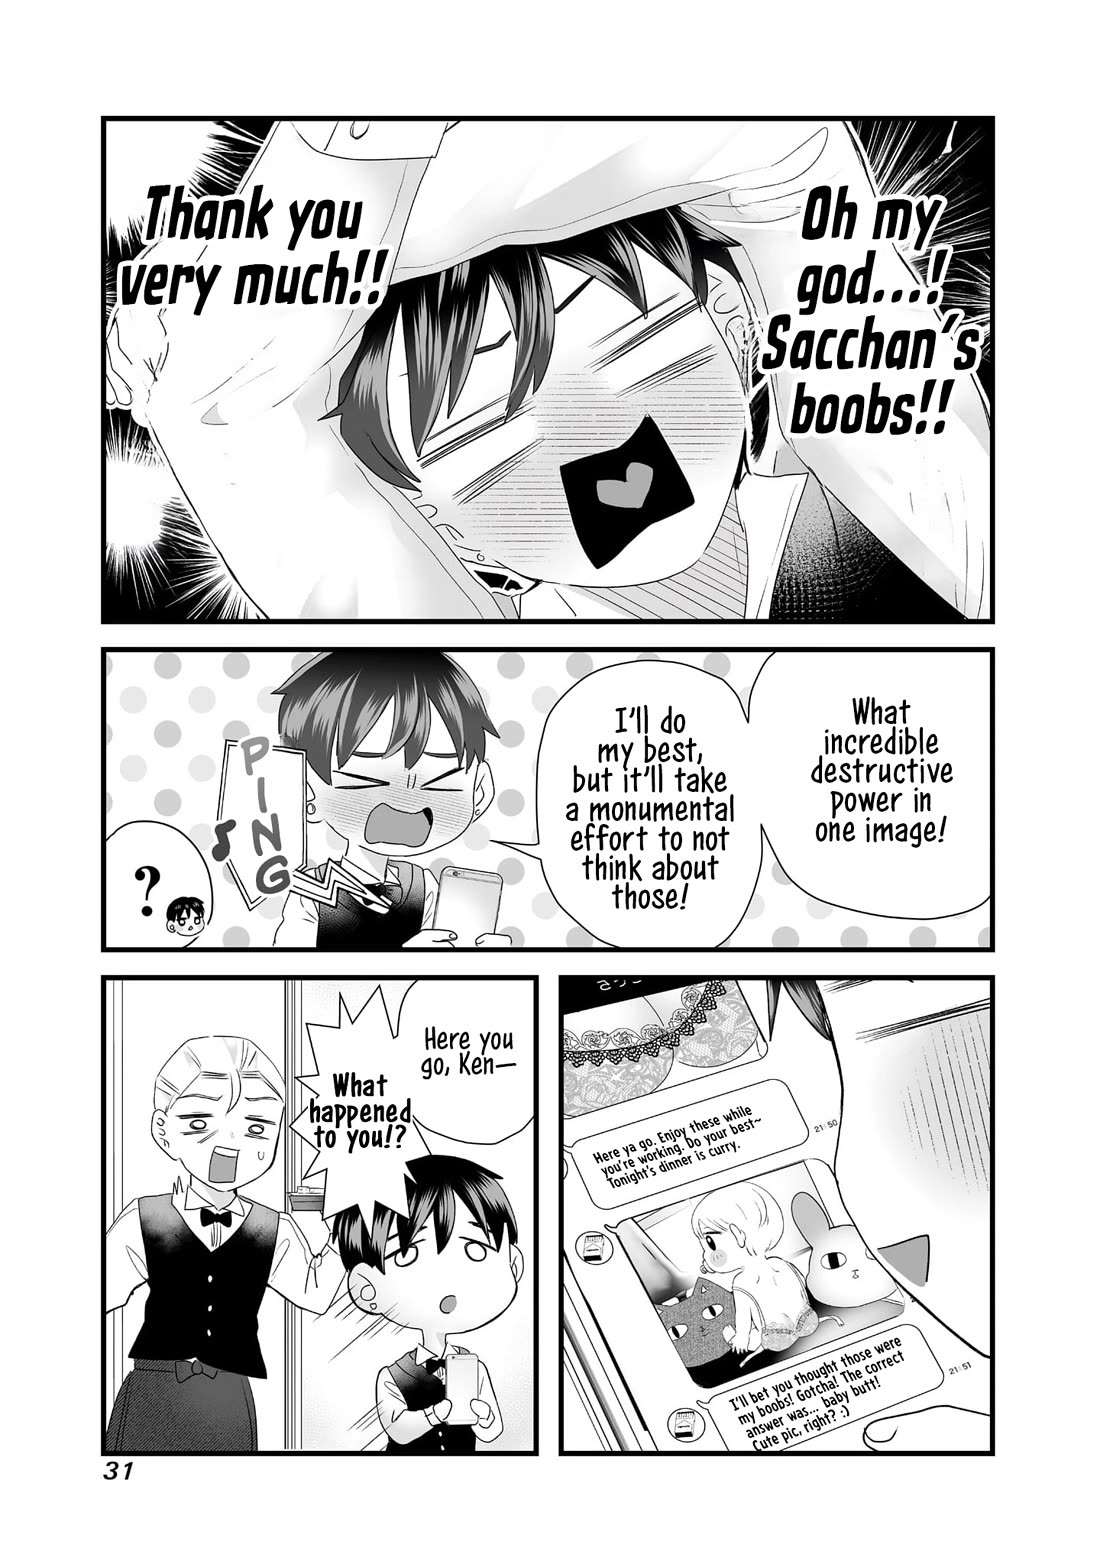 Sacchan and Ken-chan Are Going at it Again - chapter 4 - #3